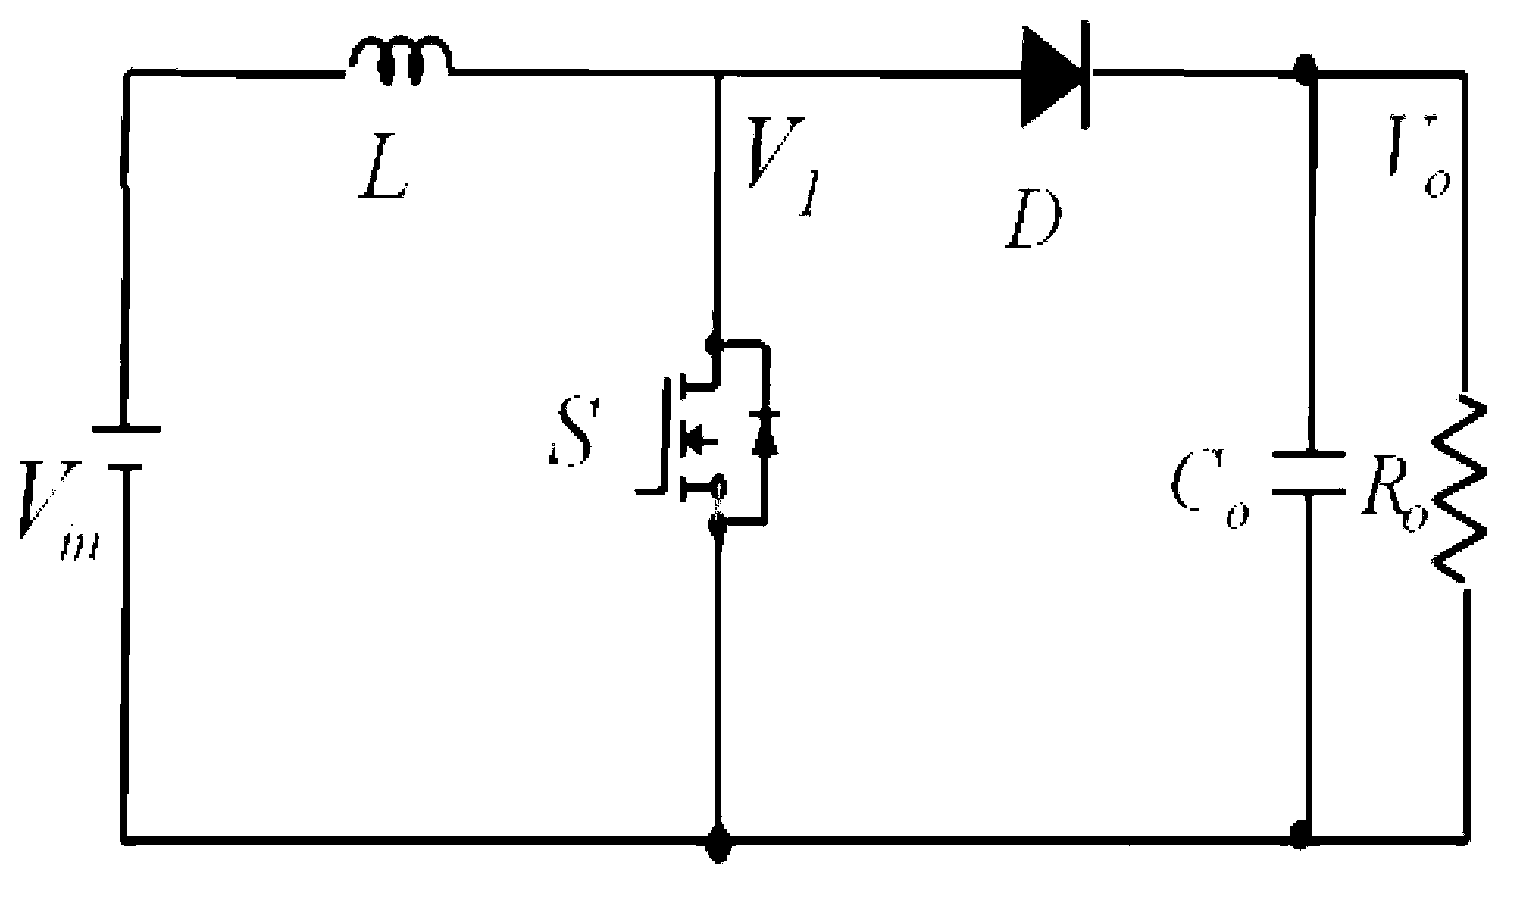 Voltage-multiplying DC converter based on charge pump capacitor